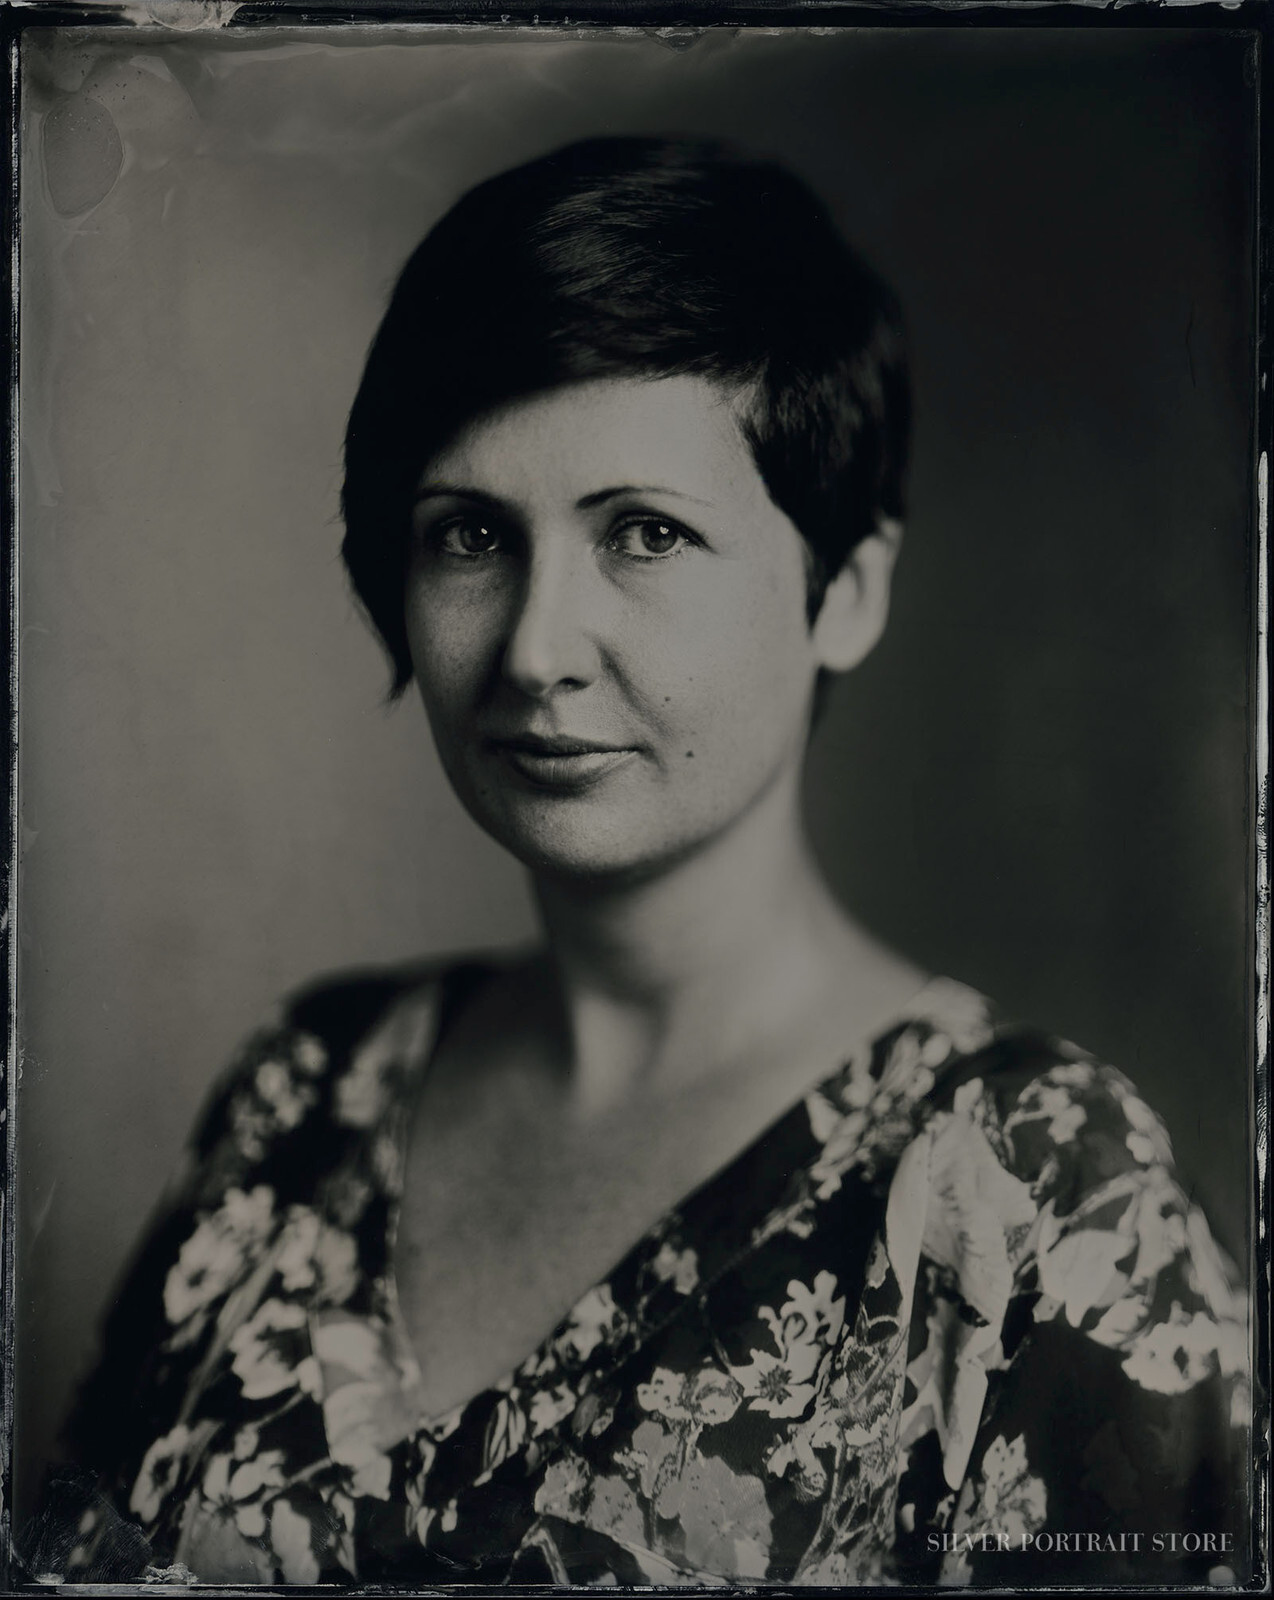 Sophi-Silver Portrait Store-Scan from Wet plate collodion-Tintype 20 x 25 cm